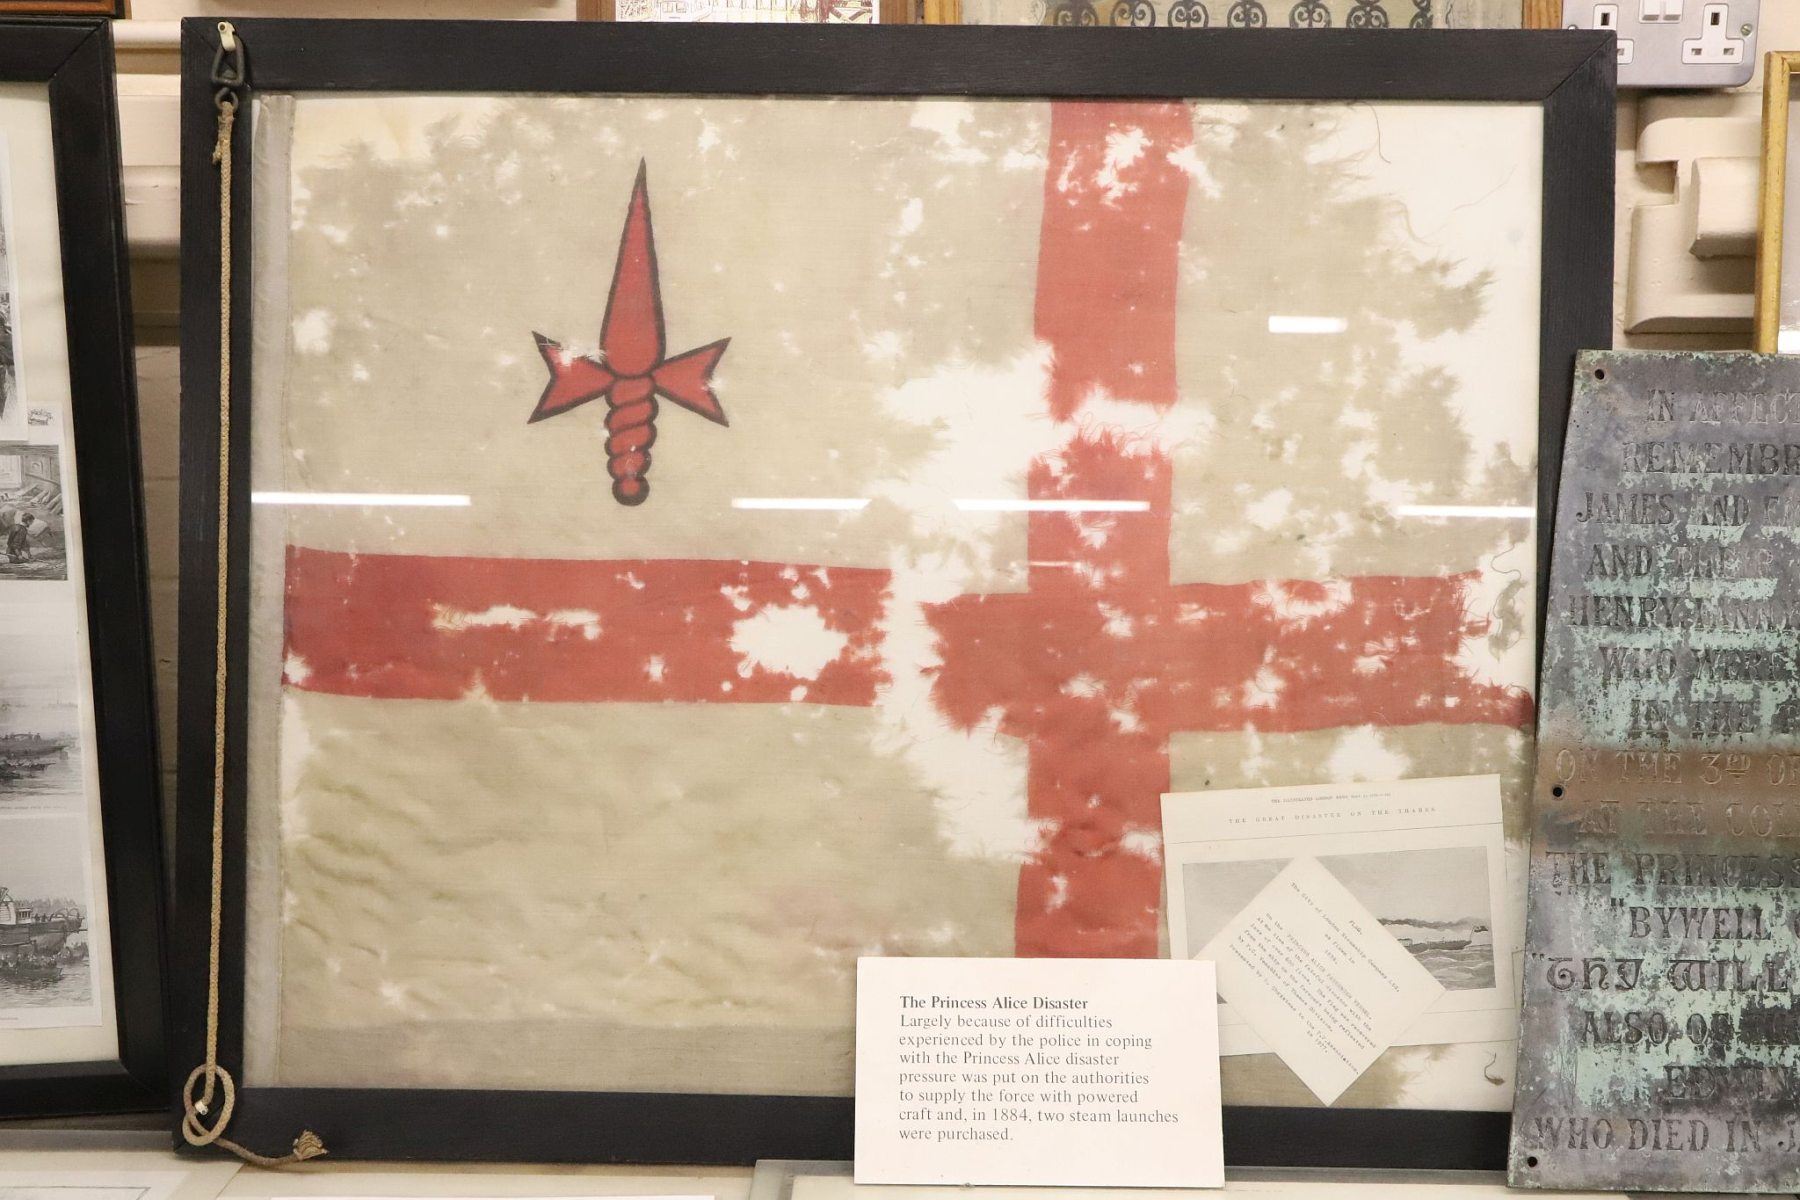 Ensign (flag) from the "Princess Alice" paddle steamer that sank in 1878 with the loss of  at least 600 lives. Metropolitan Police Marine Policing Unit Museum, River Thames, London.